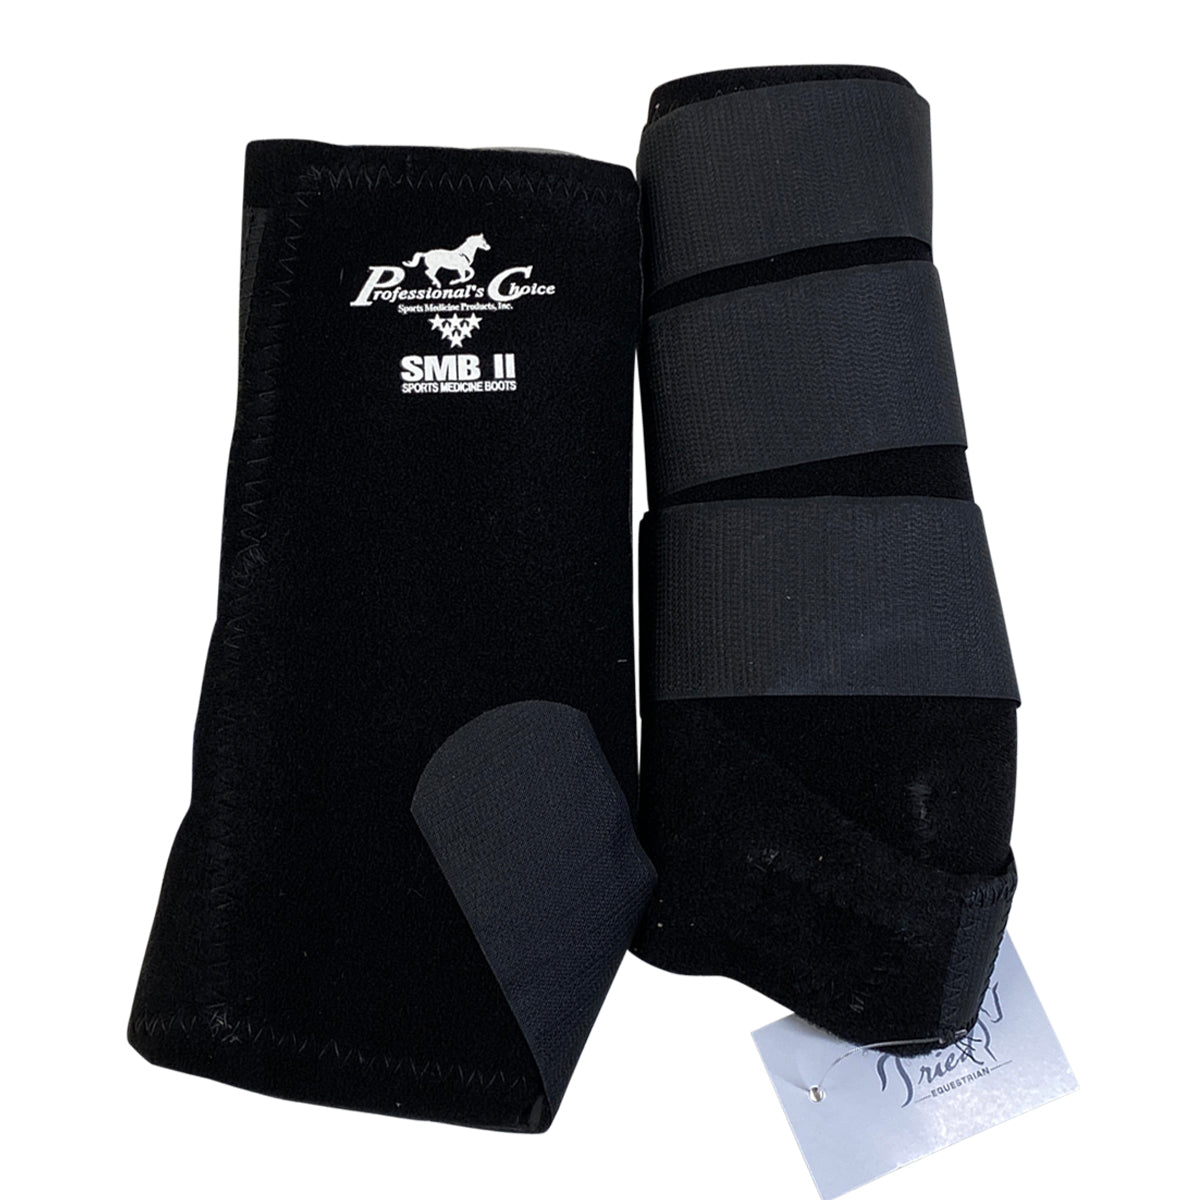 Professional&#39;s Choice &#39;SMBII&#39; Sports Medicine Boots in Black